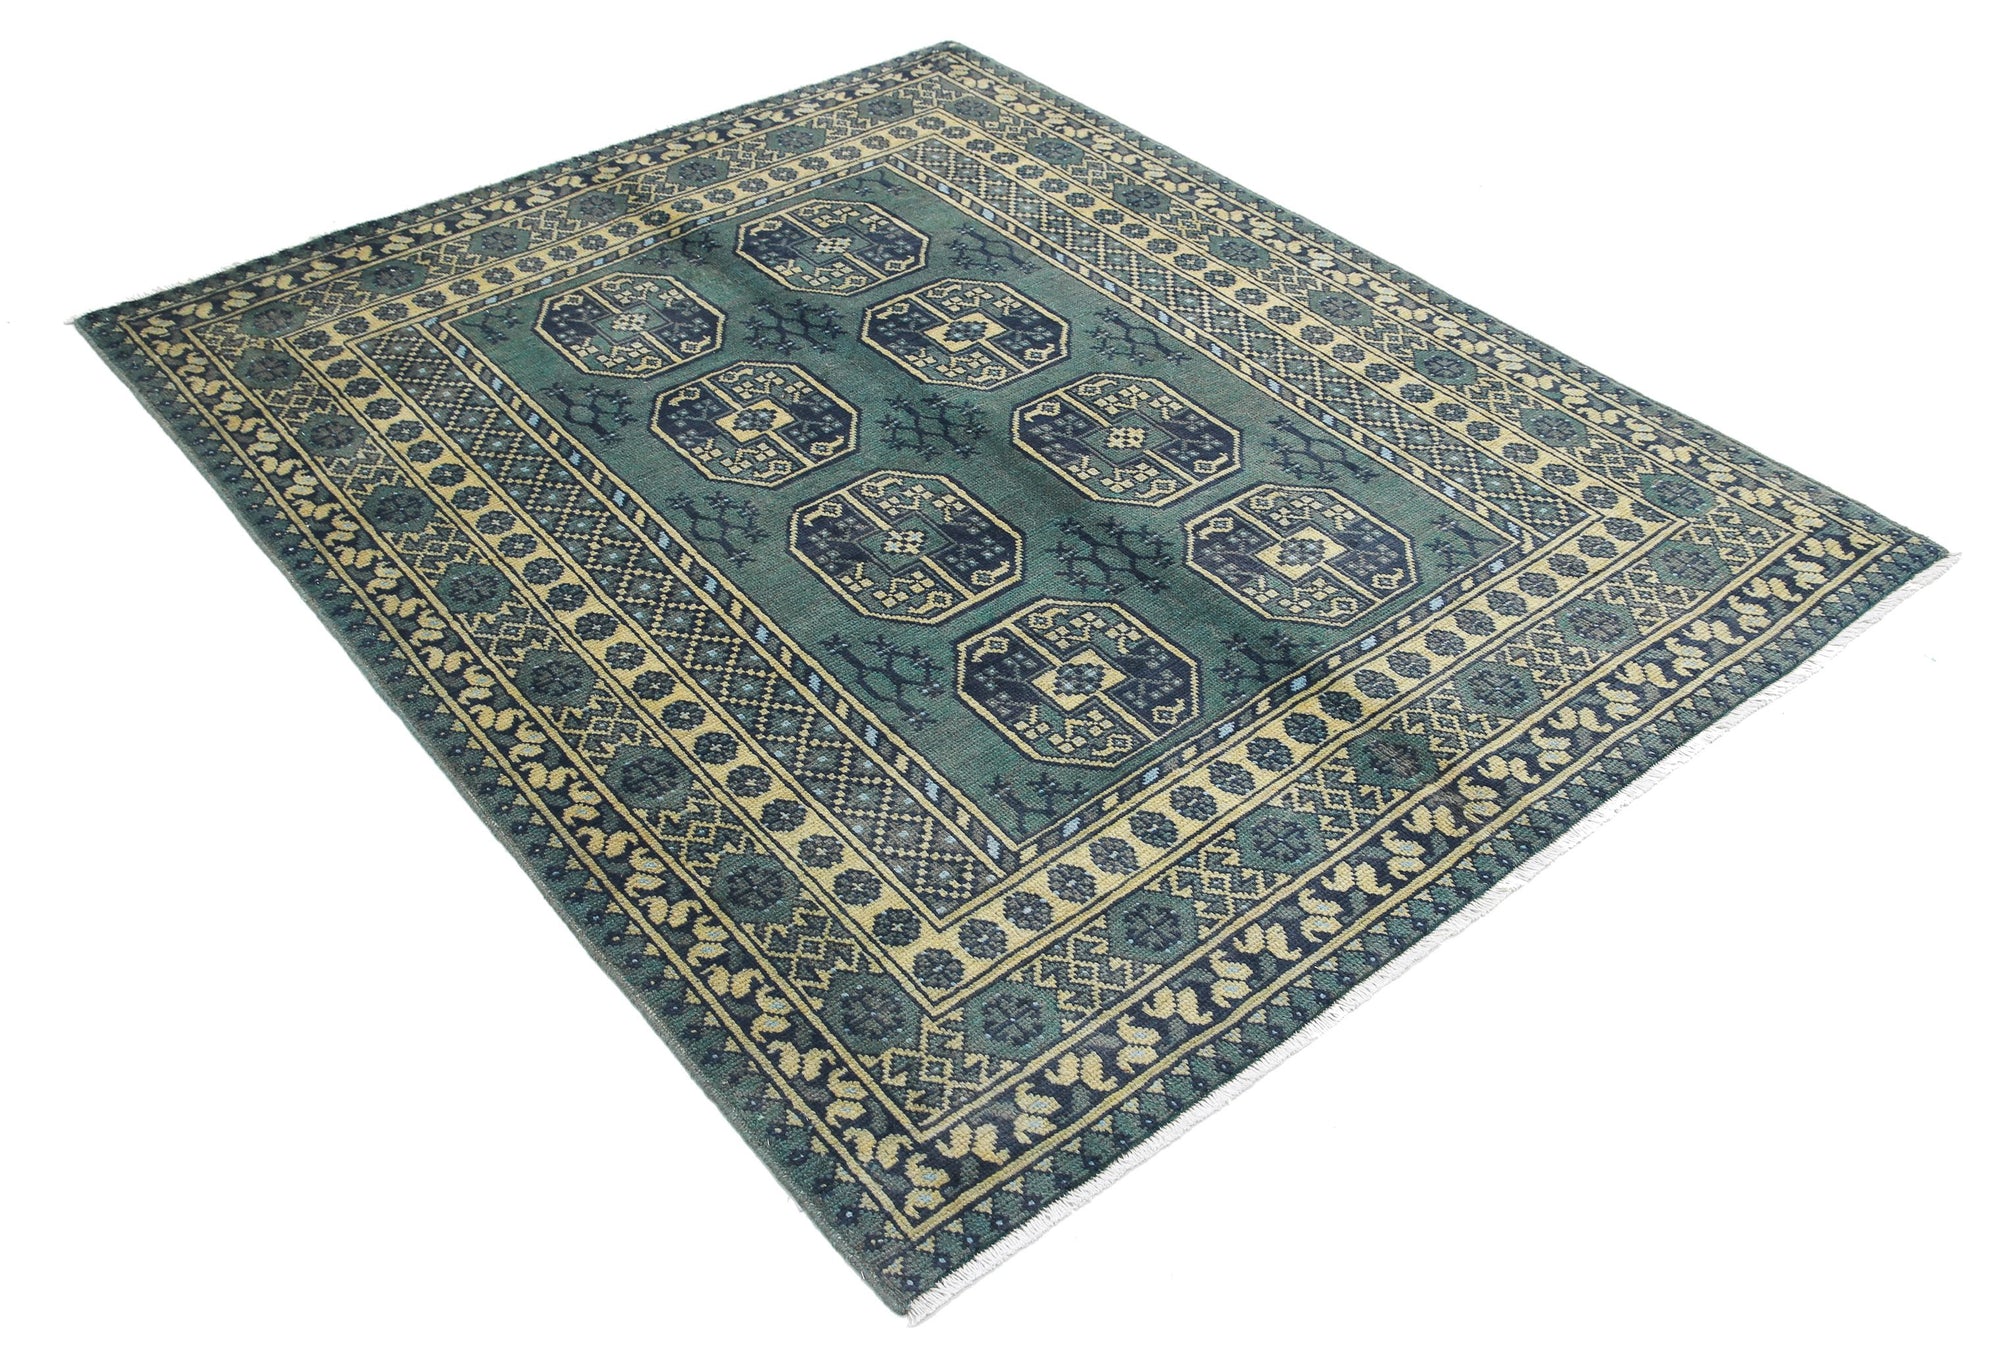 Revival-hand-knotted-gul-collection-wool-rug-5013931-1.jpg